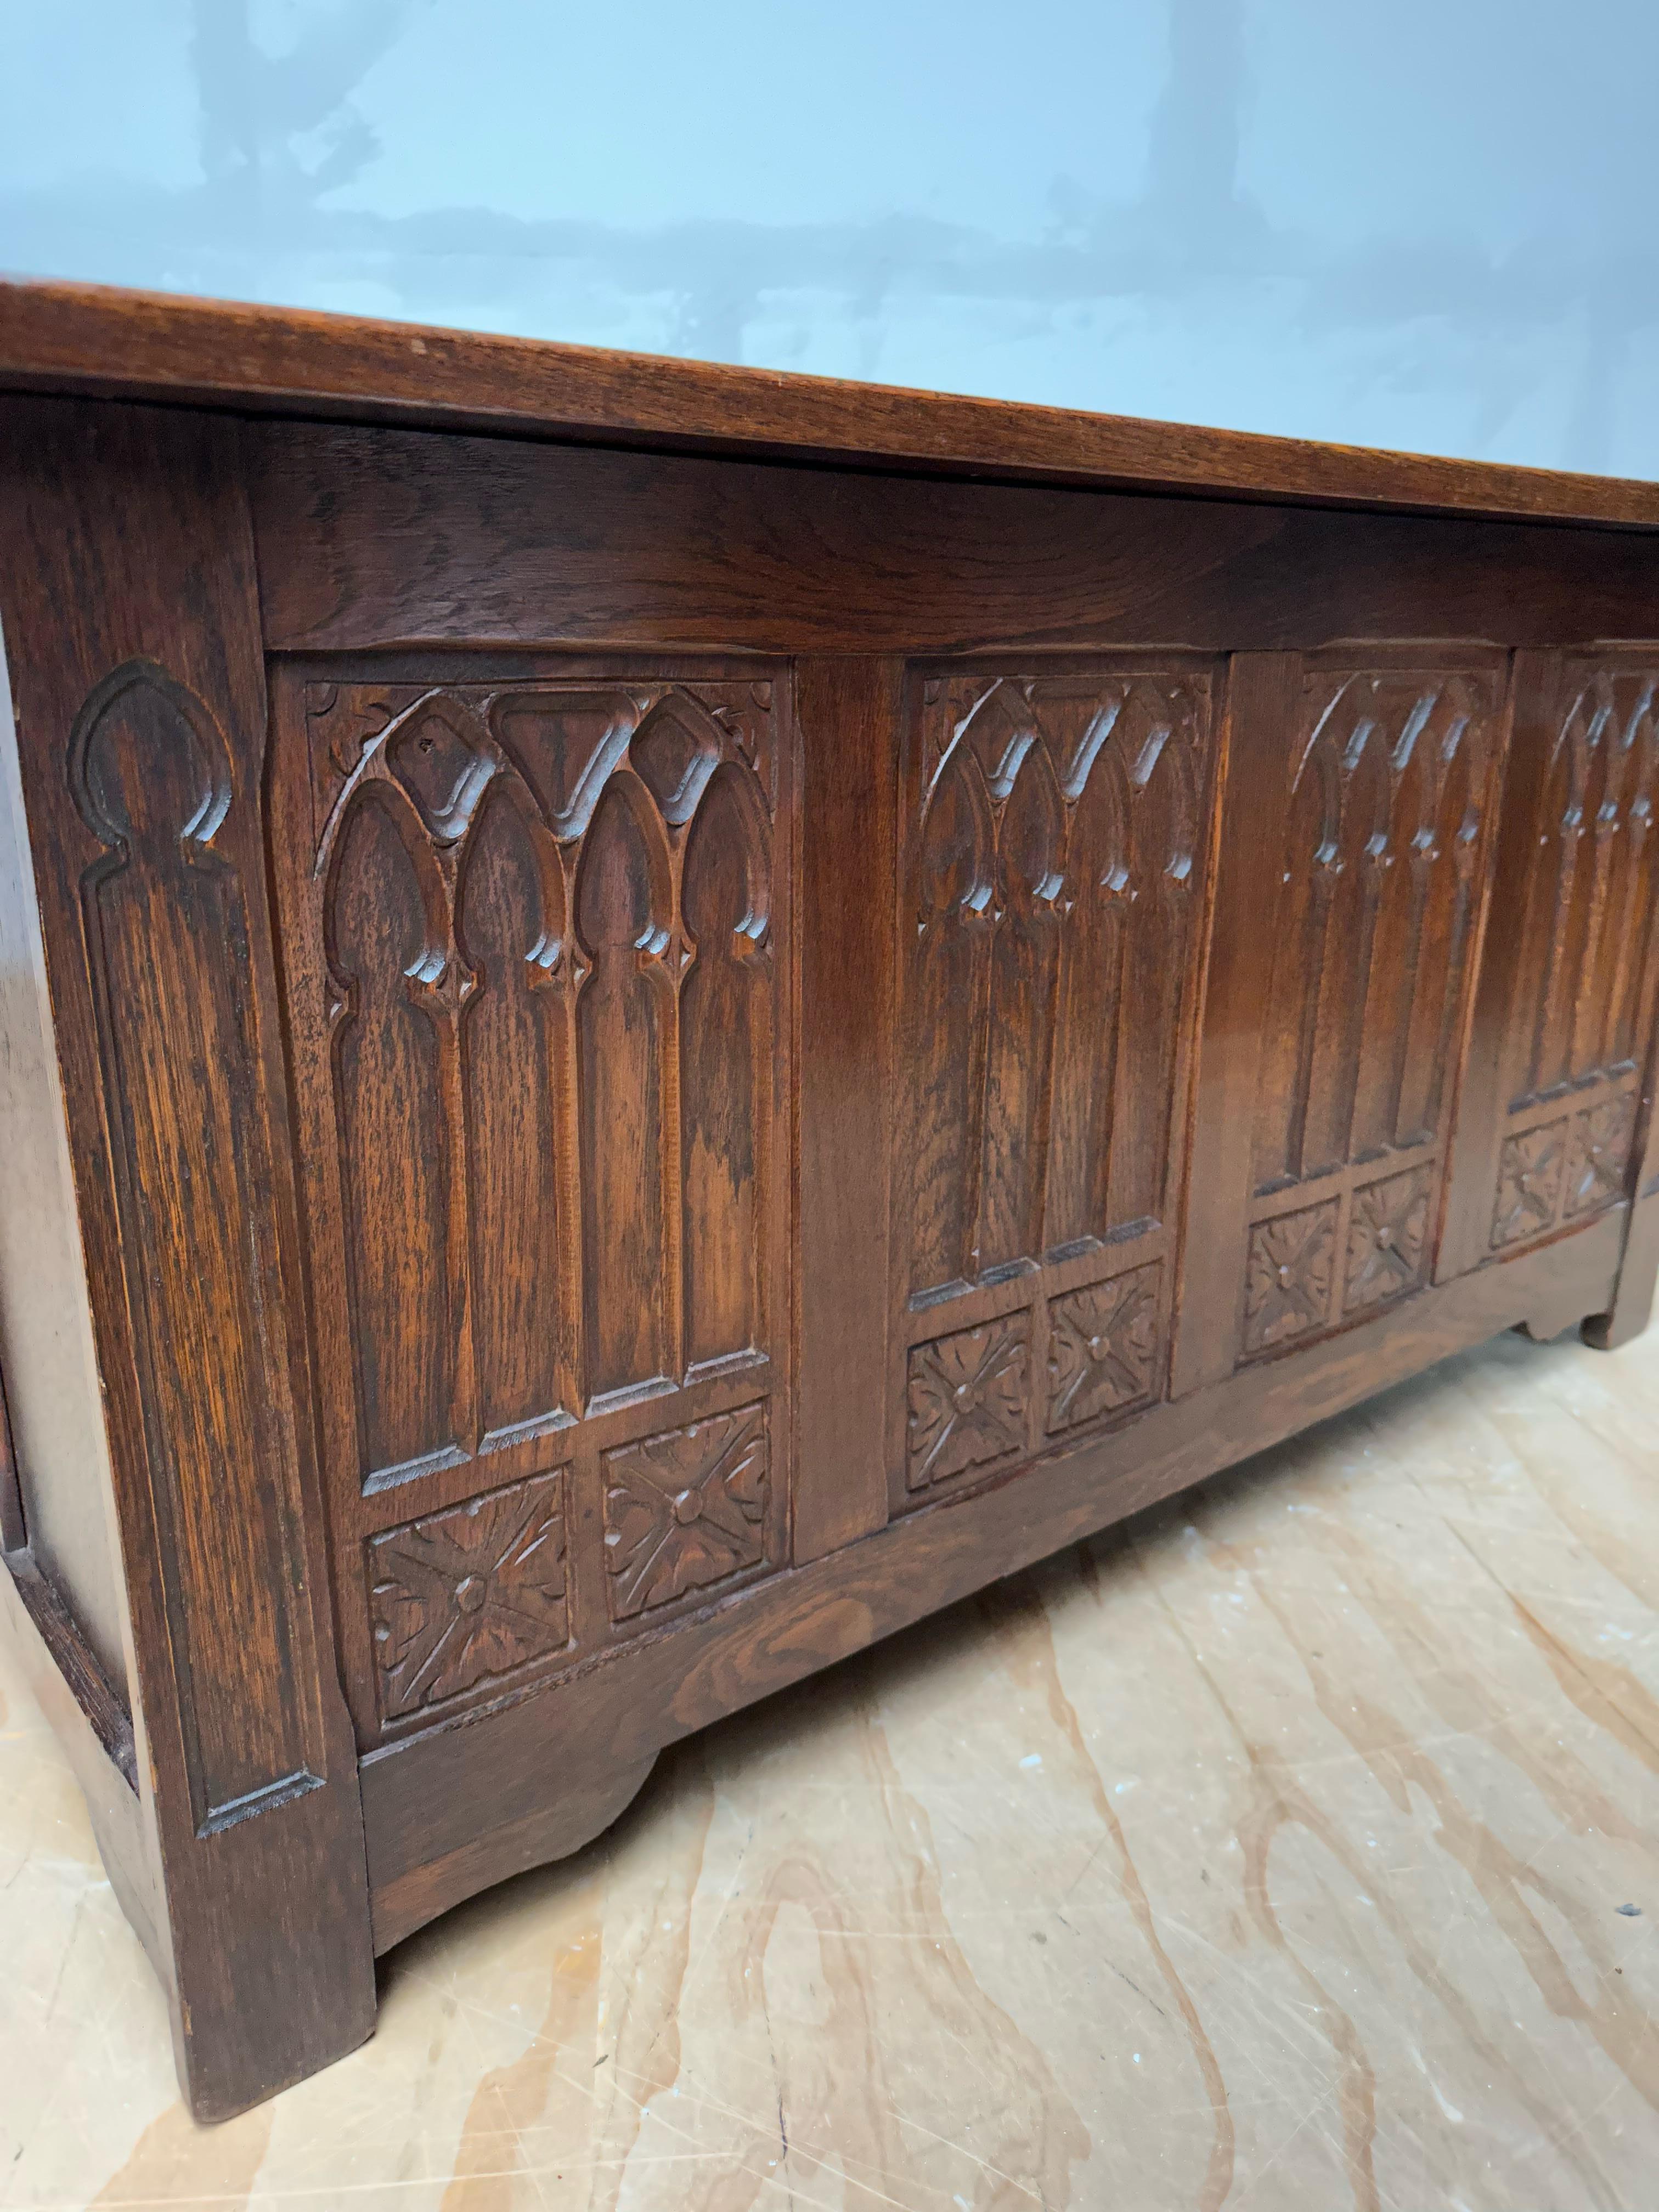 Oak Stunning & Quality Carved Gothic Revival Blanket Chest with Church Window Panels